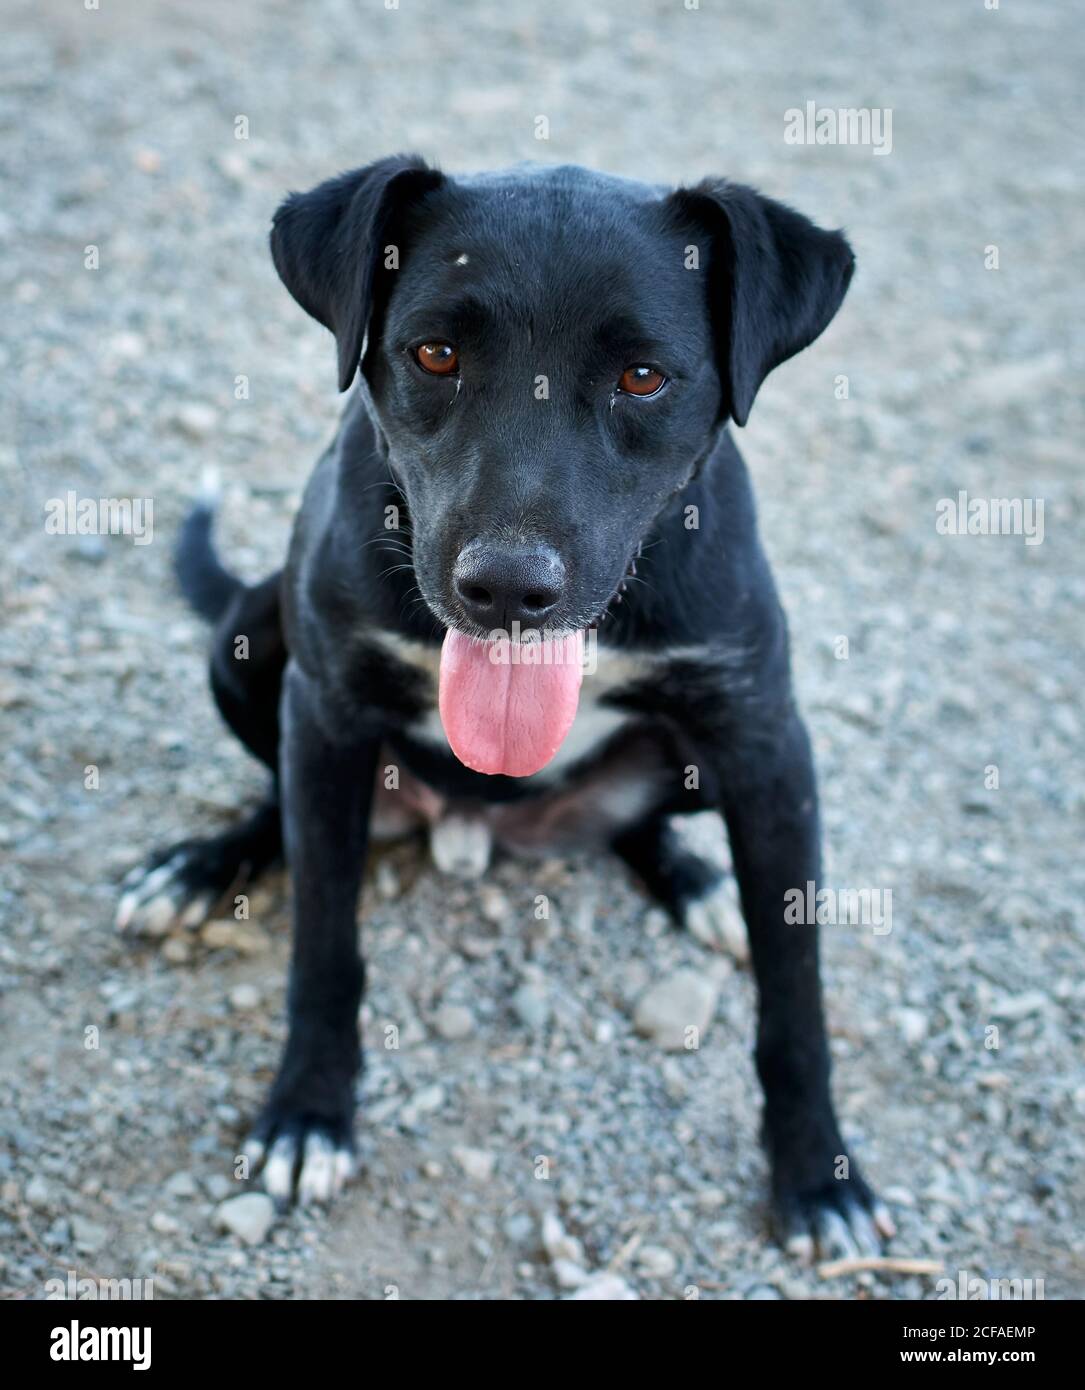 Vertical shot of a cute black Patterdale Terrier dog Stock Photo